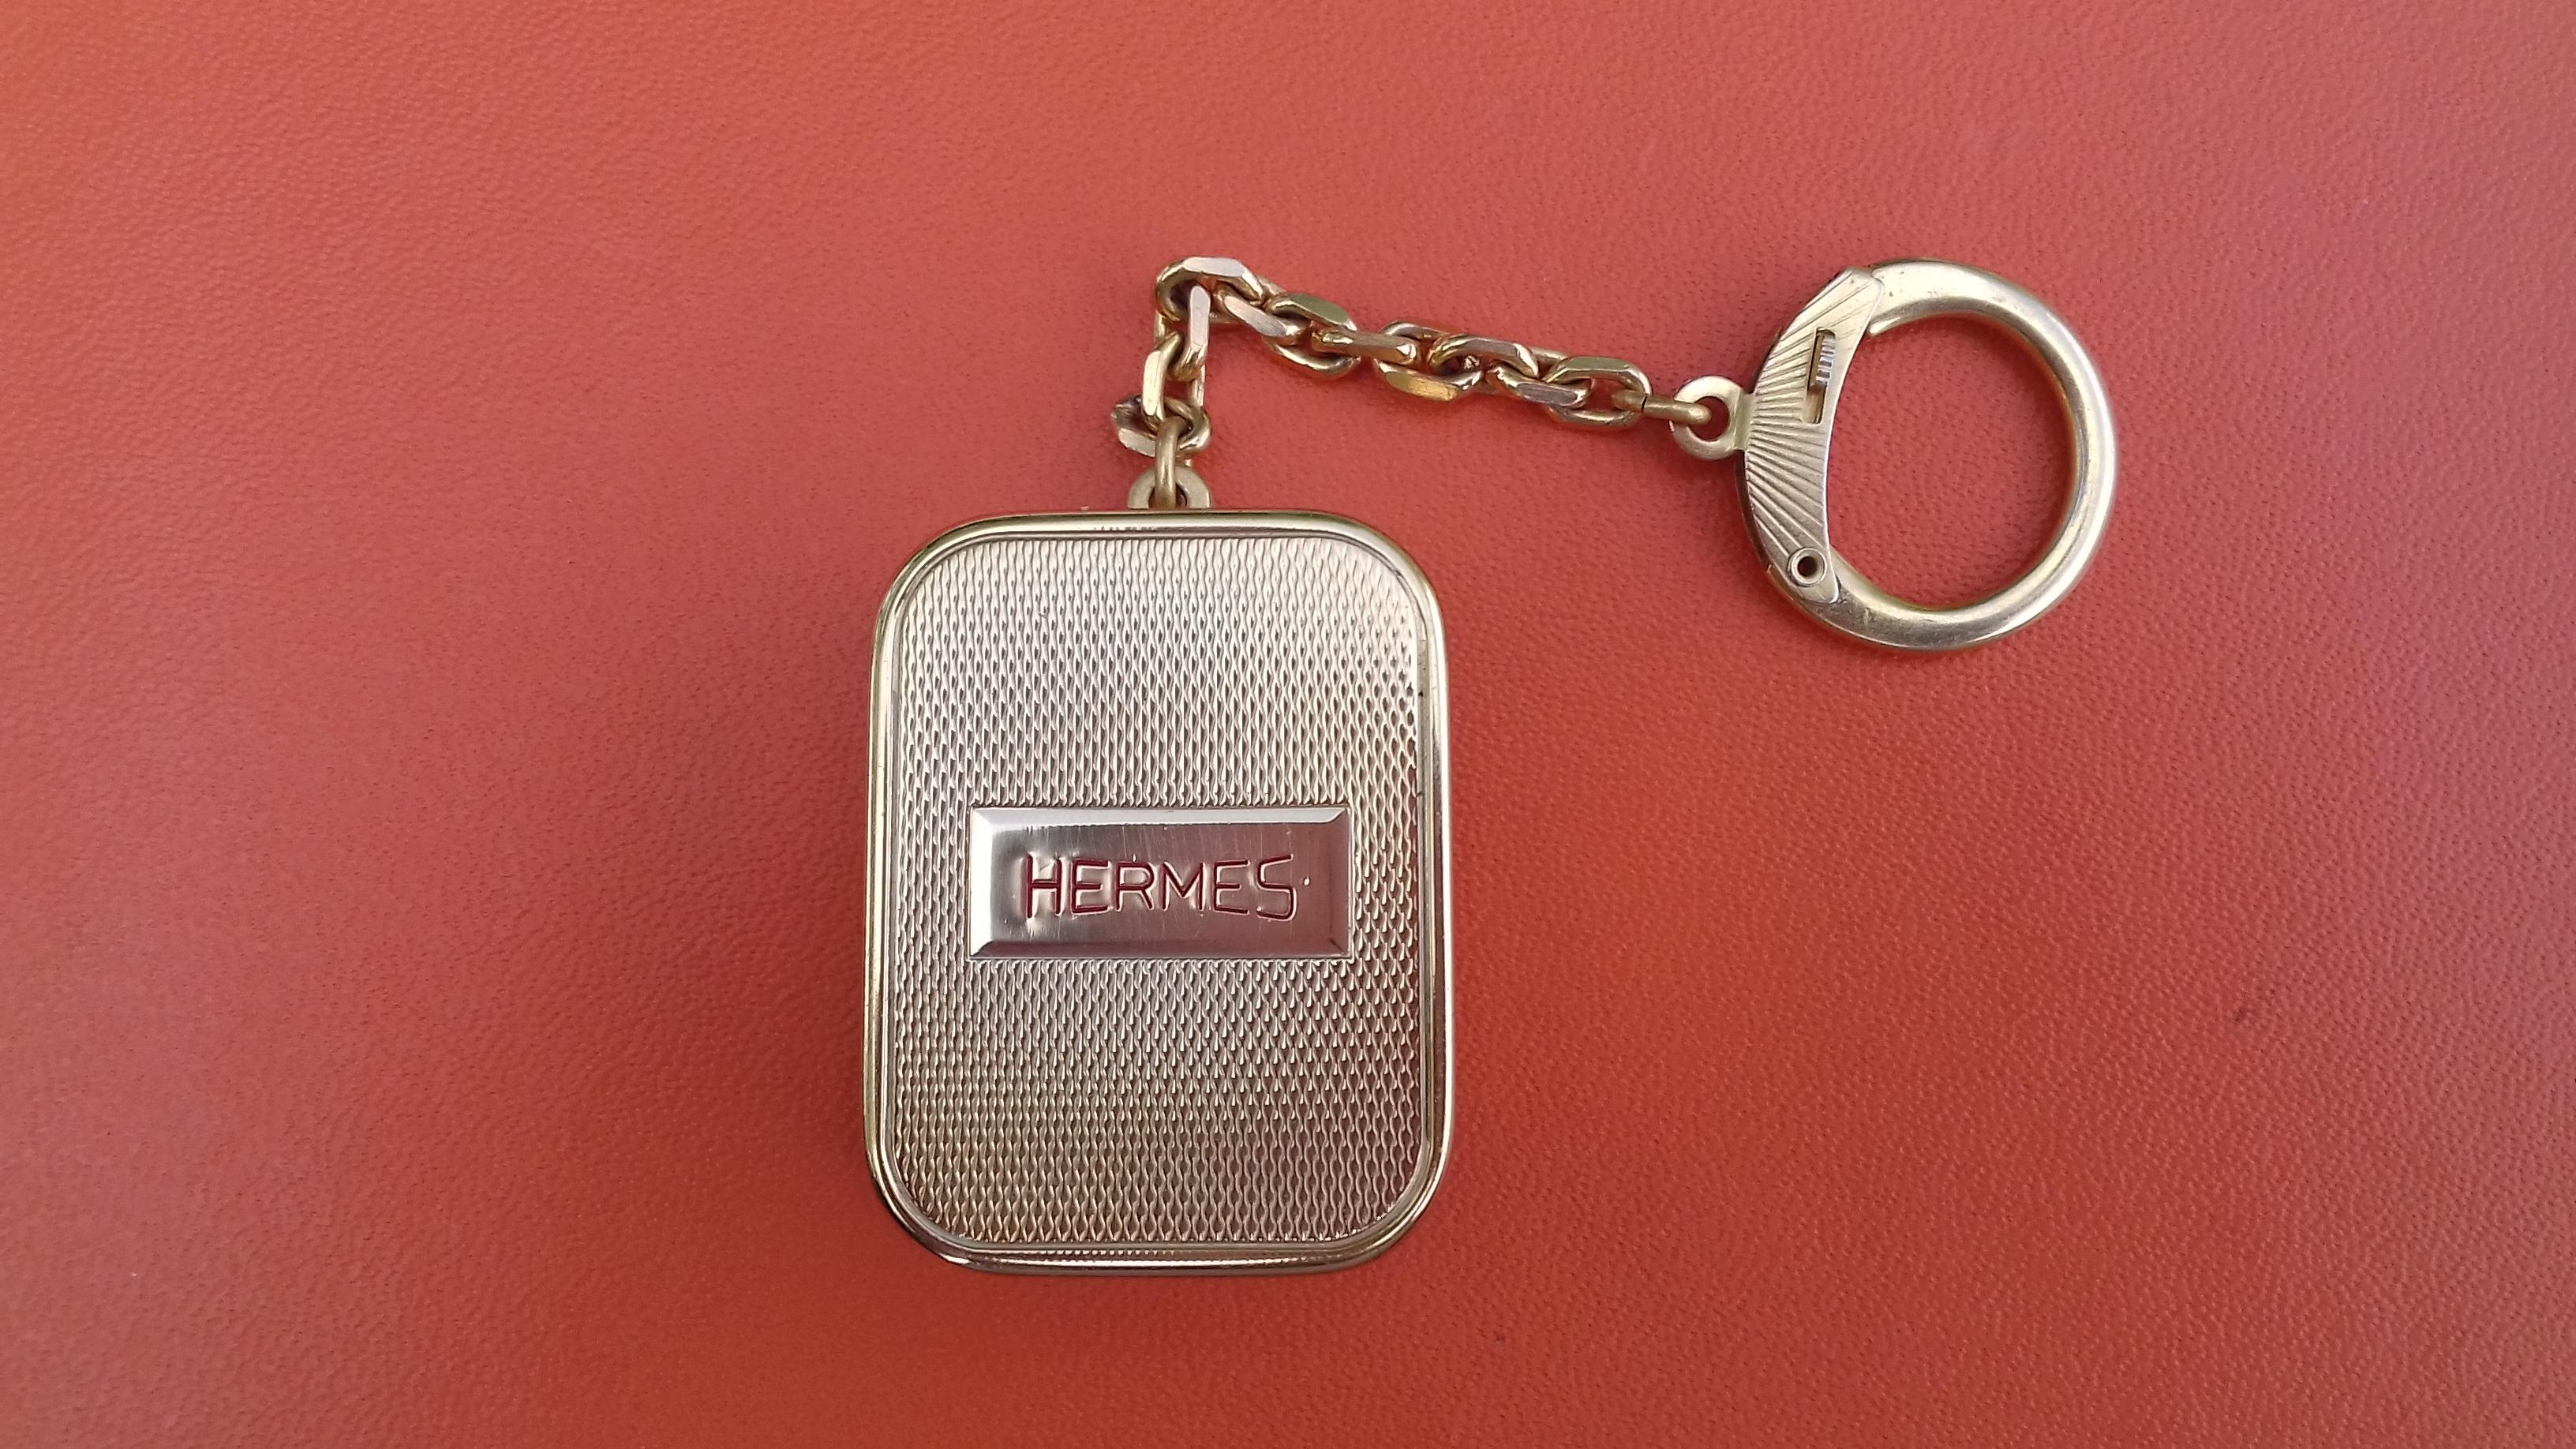 Rare Authentic Hermès Keychain

It is also a music box ! Please ask for a video if you want to hear the music

Turn the mechanical key (at the back) clockwise and pull up the small button to hear the music 

Made by Reuge Sainte Croix, specialist